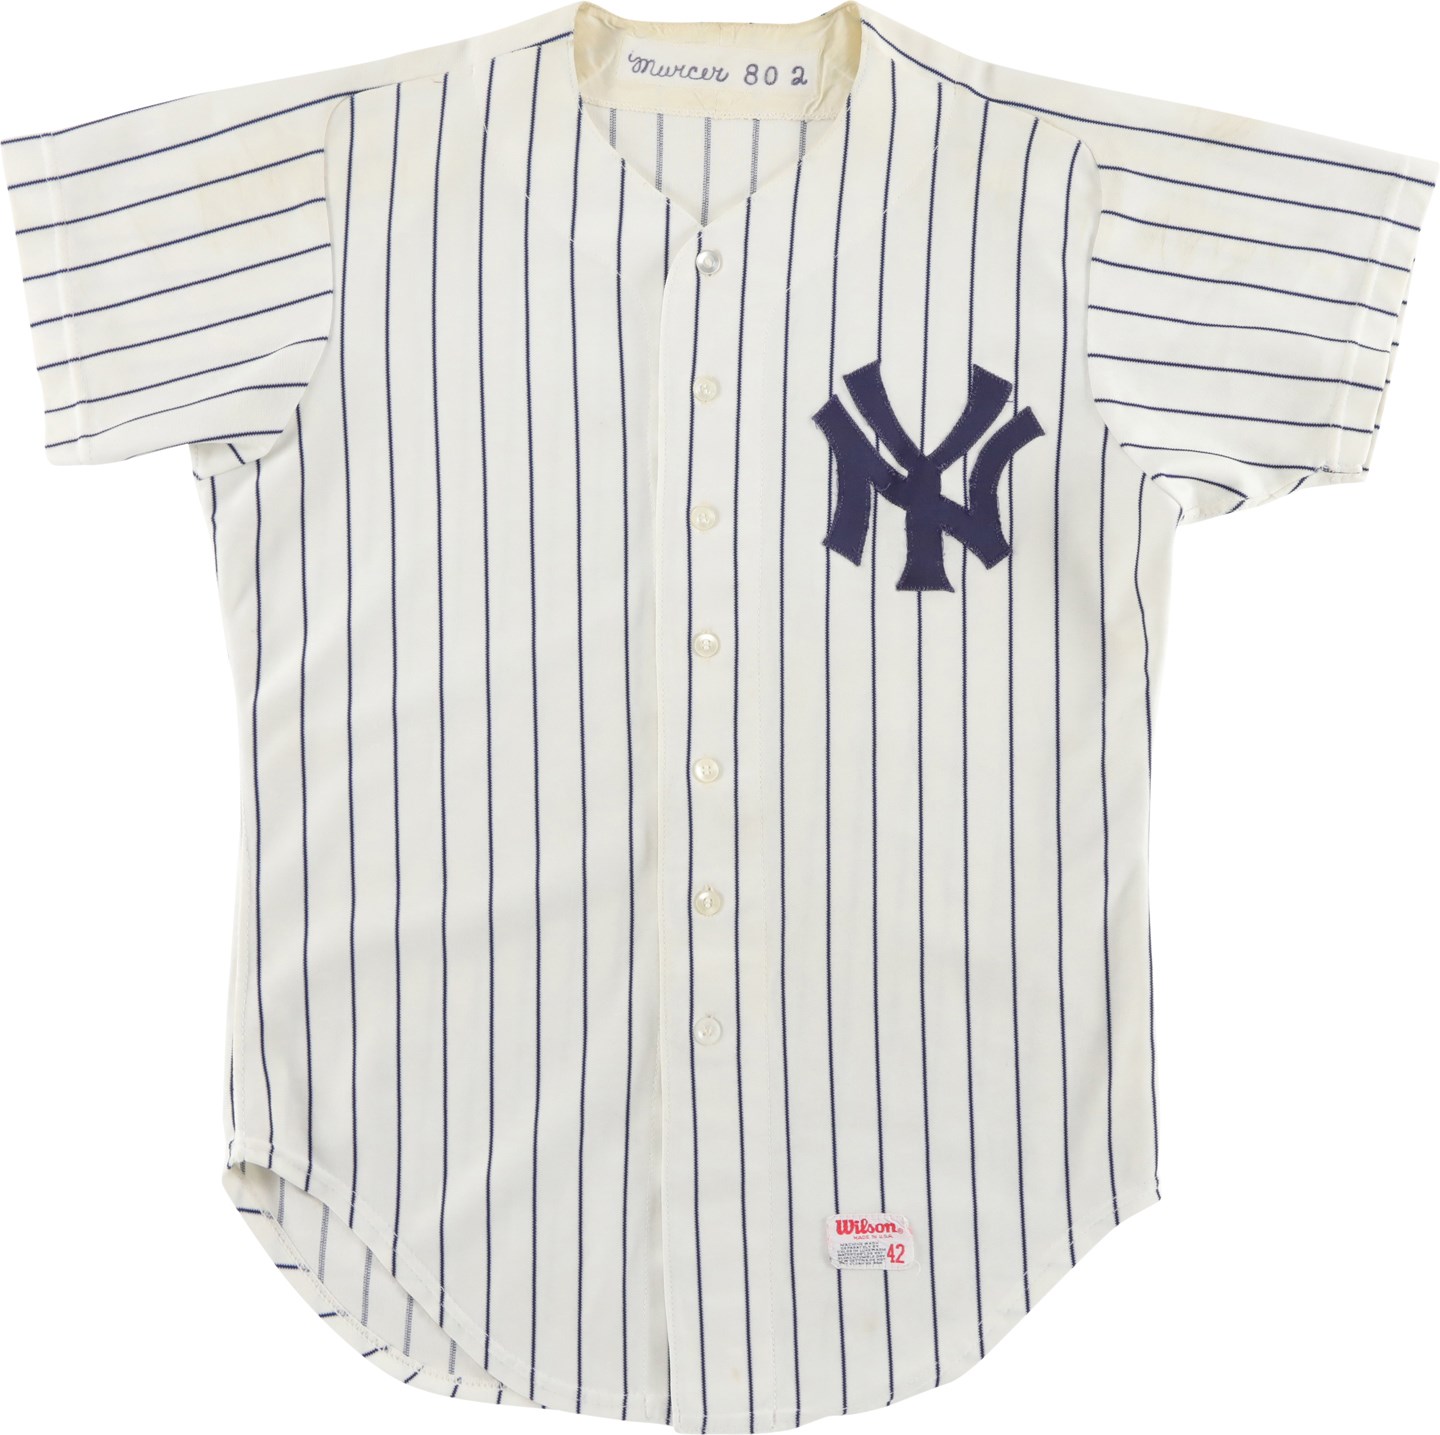 1980 Bobby Murcer Photo-Matched New York Yankees Game Worn Jersey from Thurman Munson Plaque Dedication Game - Three Additional Matches with Home Run Game (Davious Photo-Matched LOA)